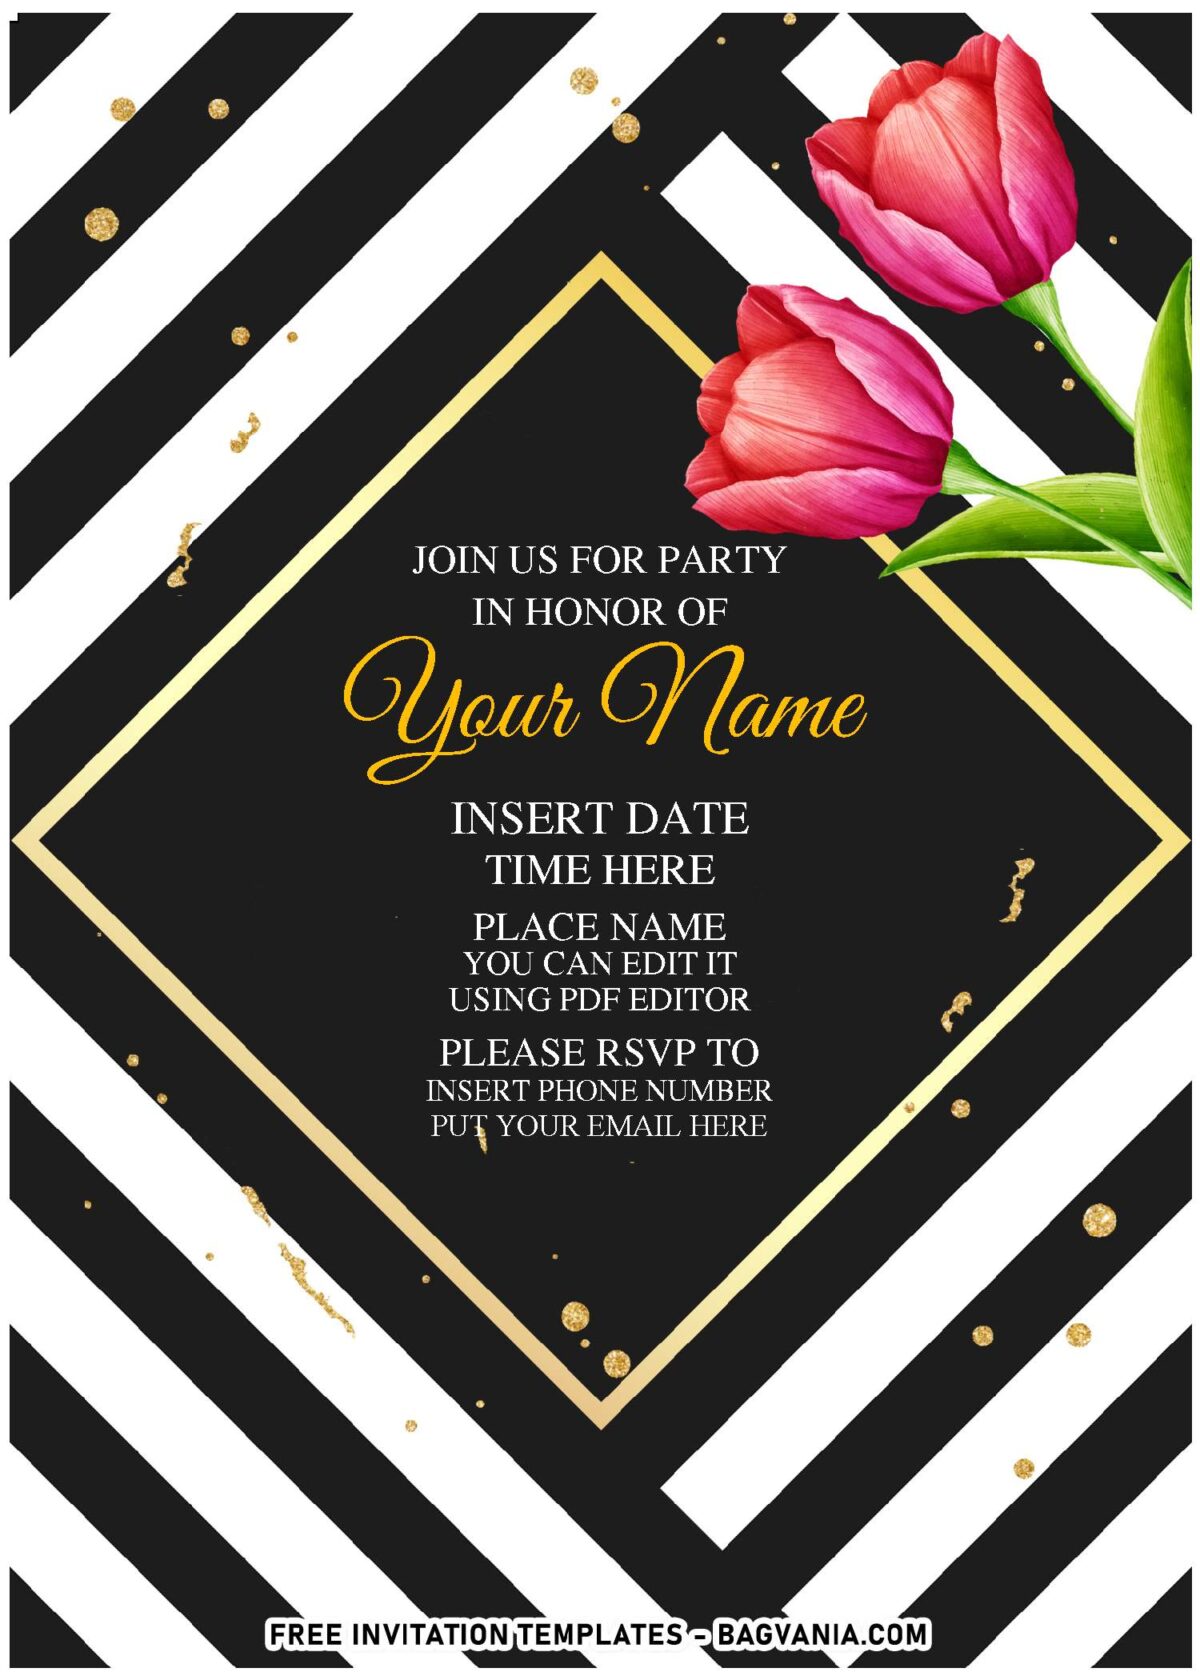 (Free Editable PDF) Classic Palette Black And White Floral Invitation Templates with sparkly gold glitters